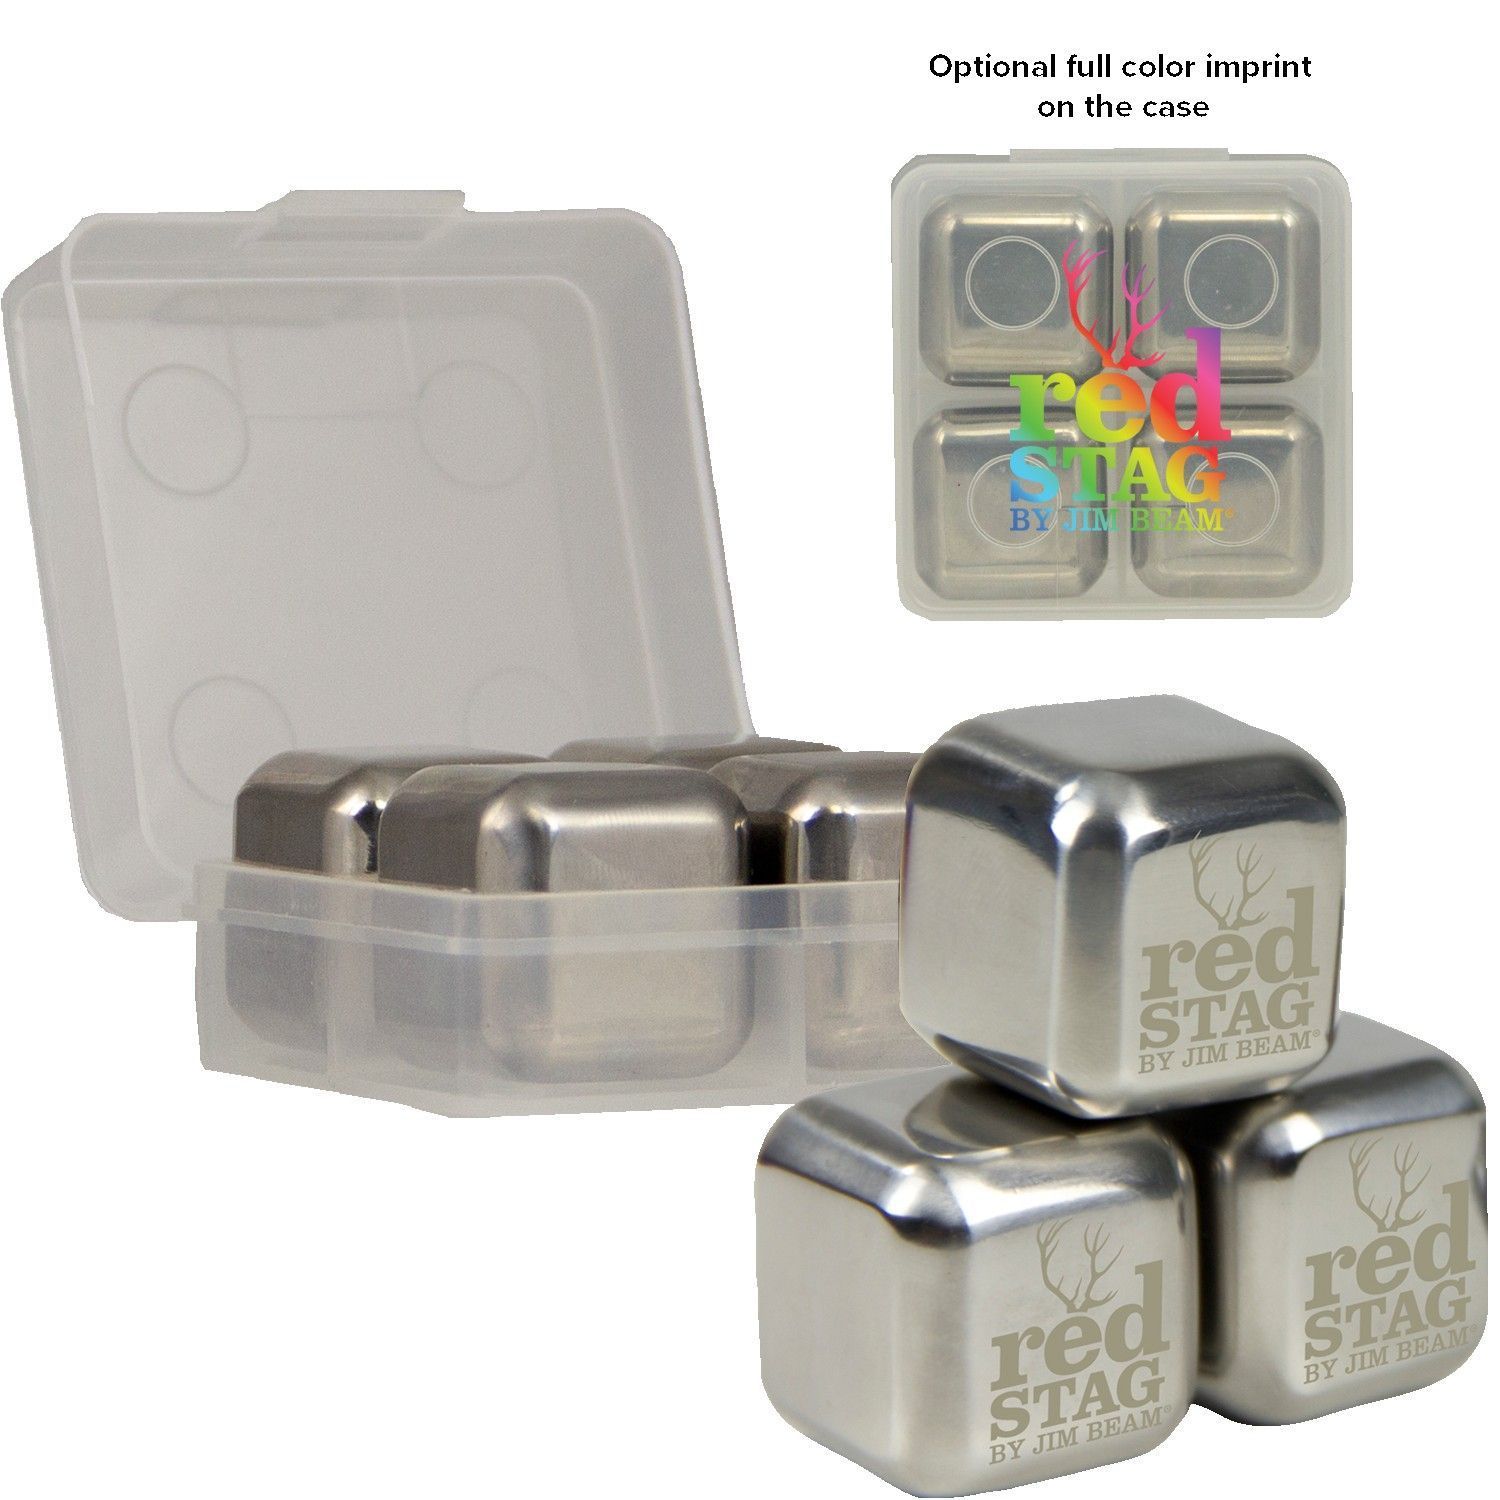 Stainless Steel Beverage Cubes